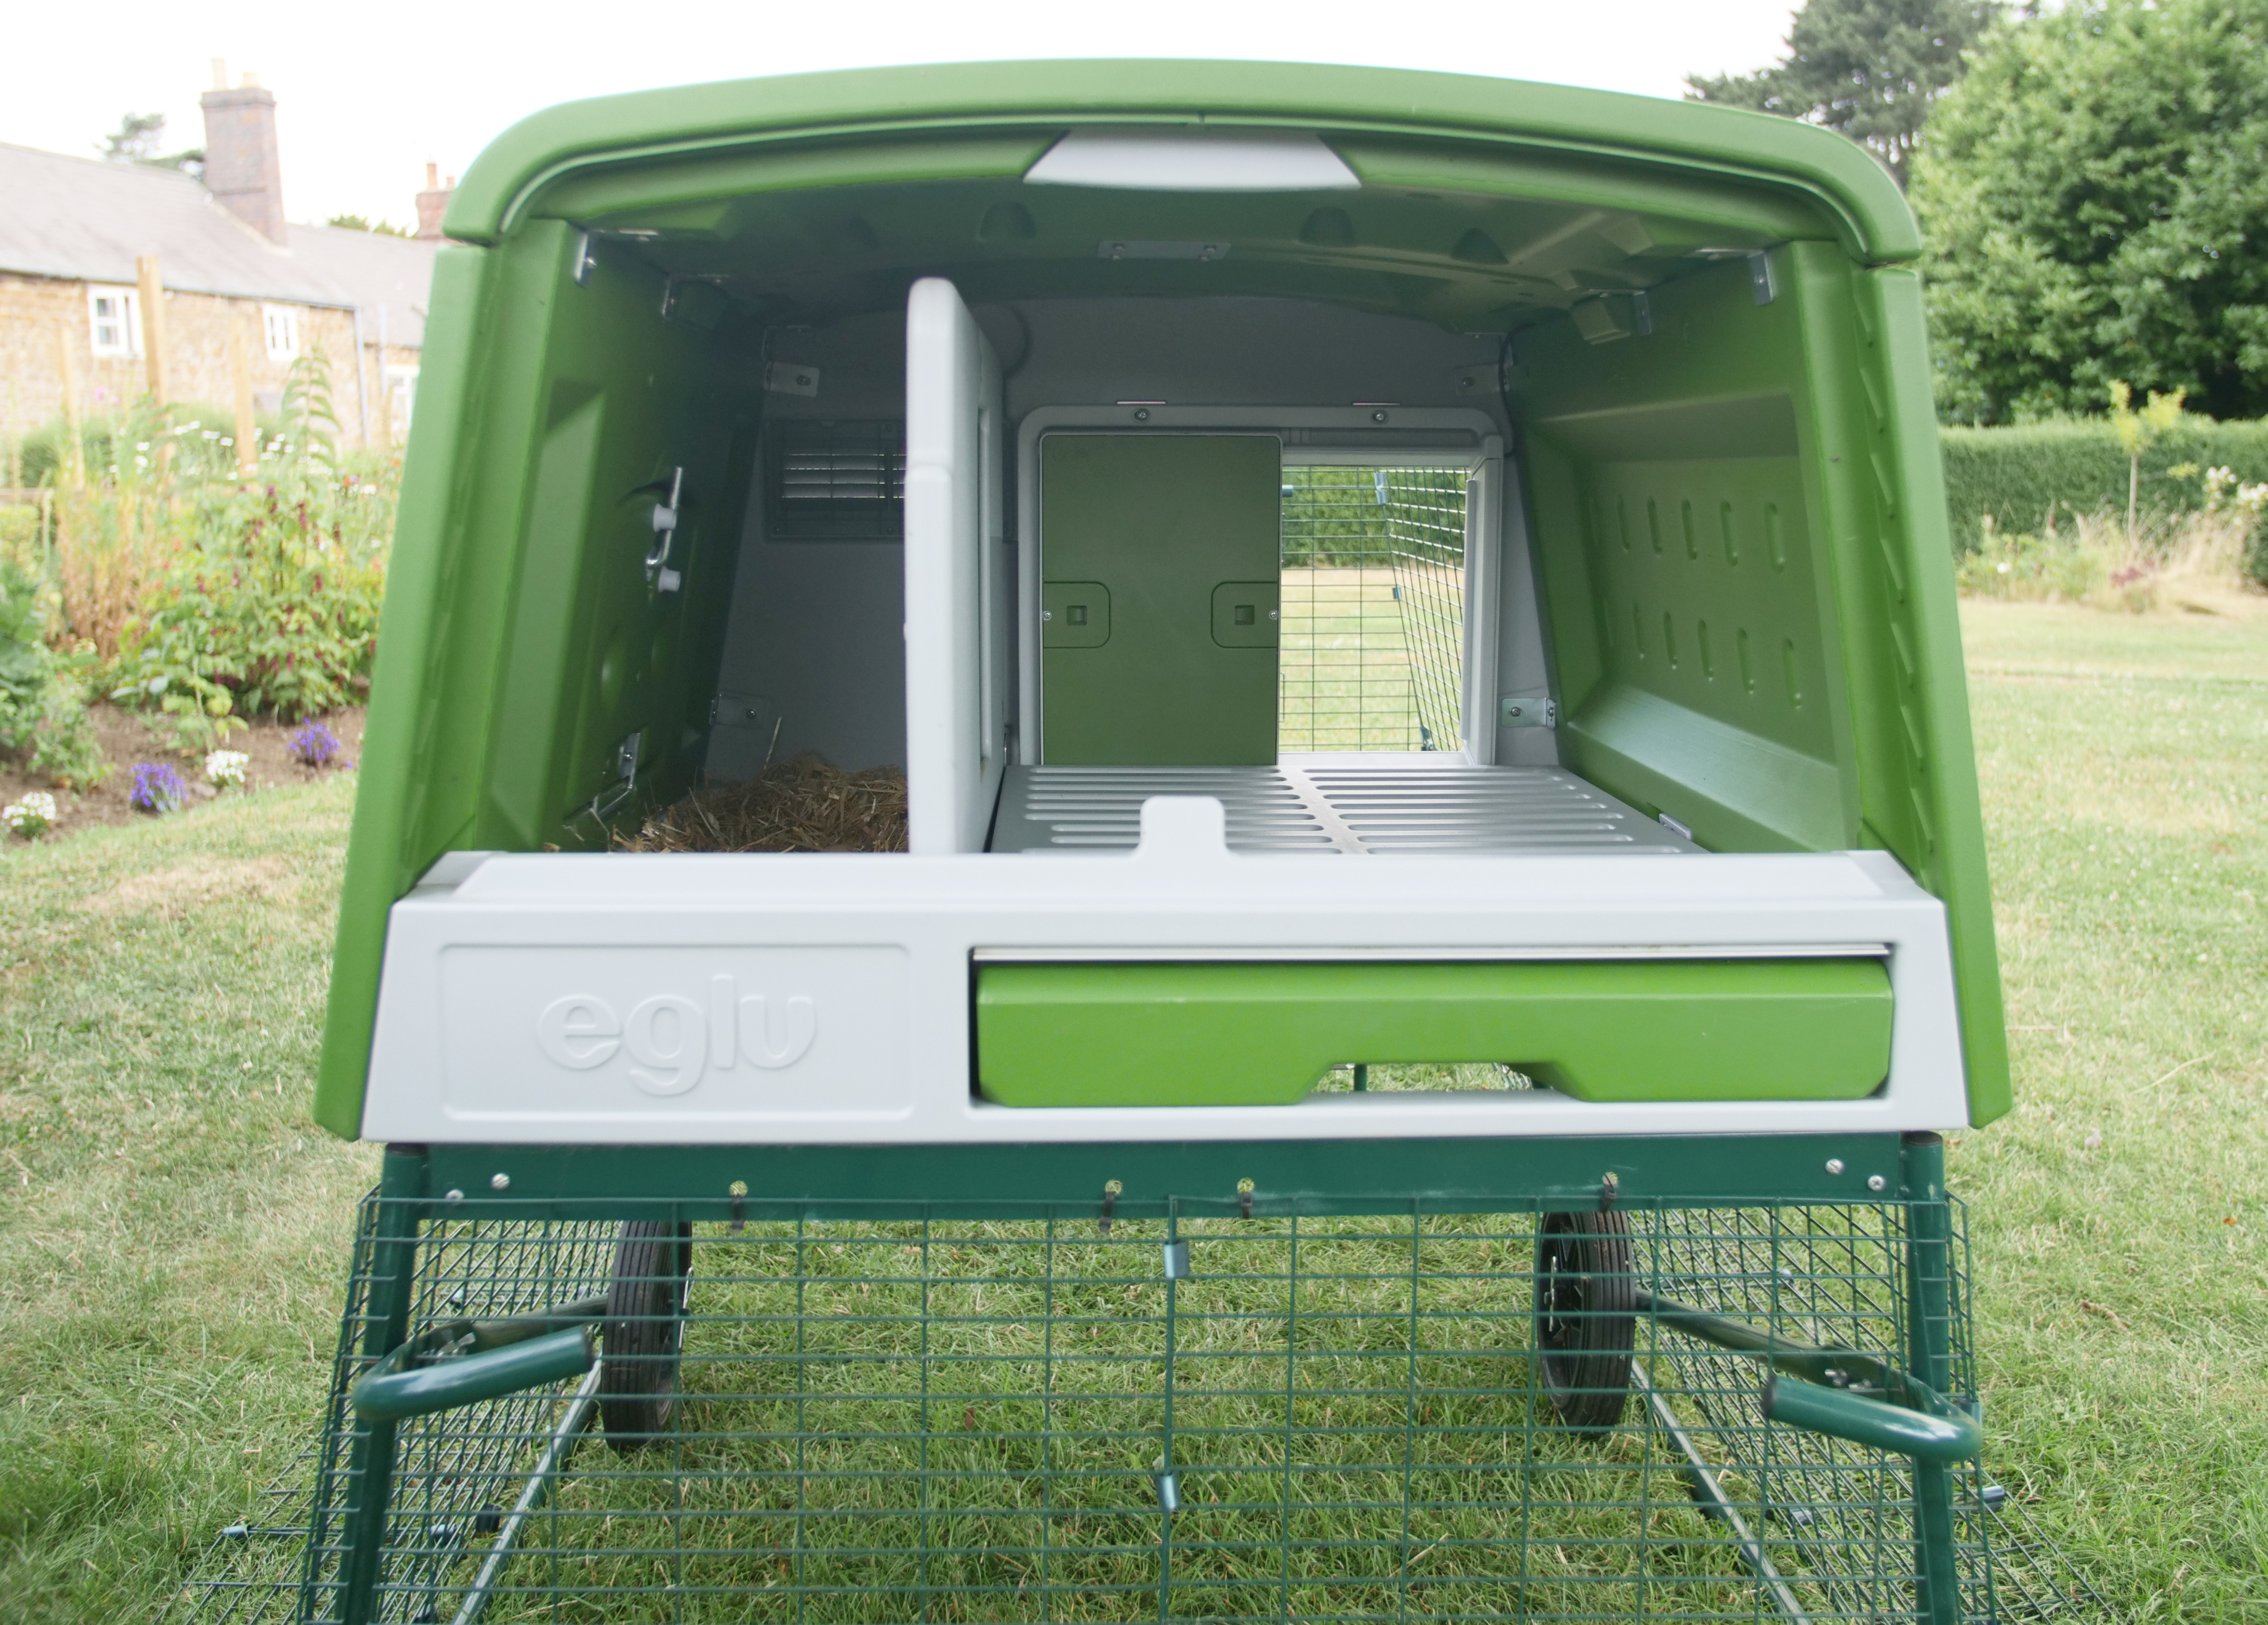 The Autodoor attaches directly to the inside of the Eglu Cube Mk2